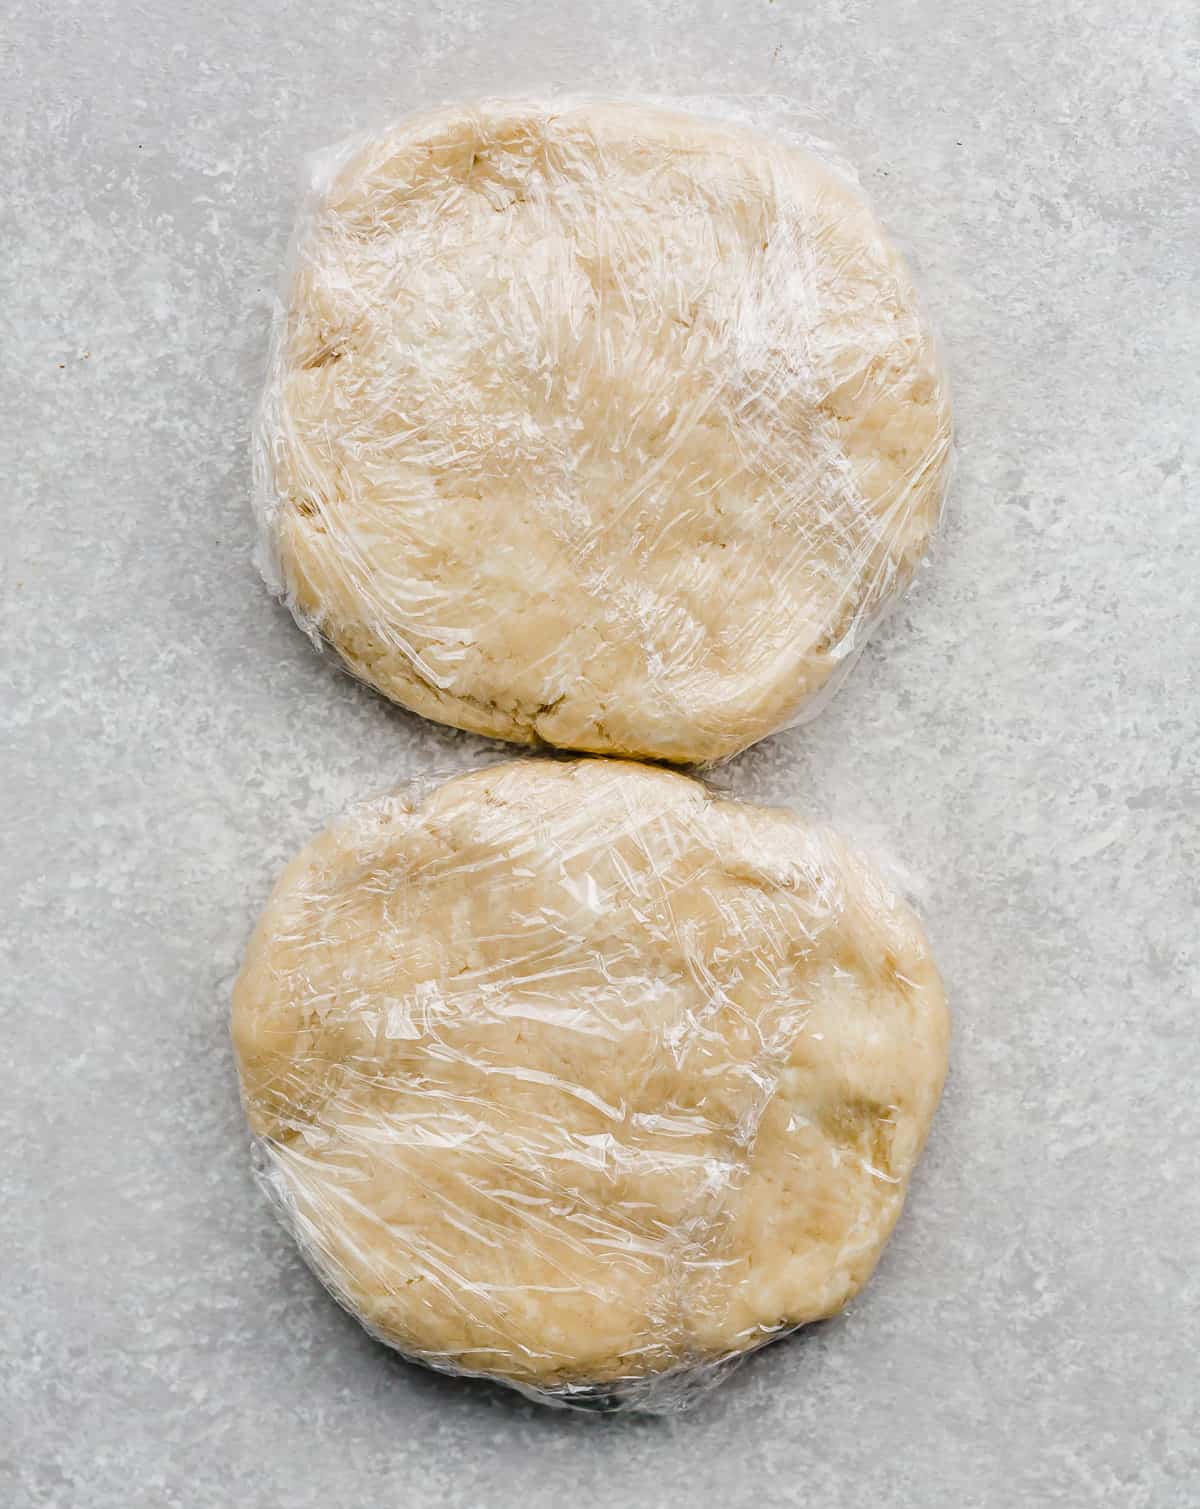 Two pie crust dough disks on a gray background.